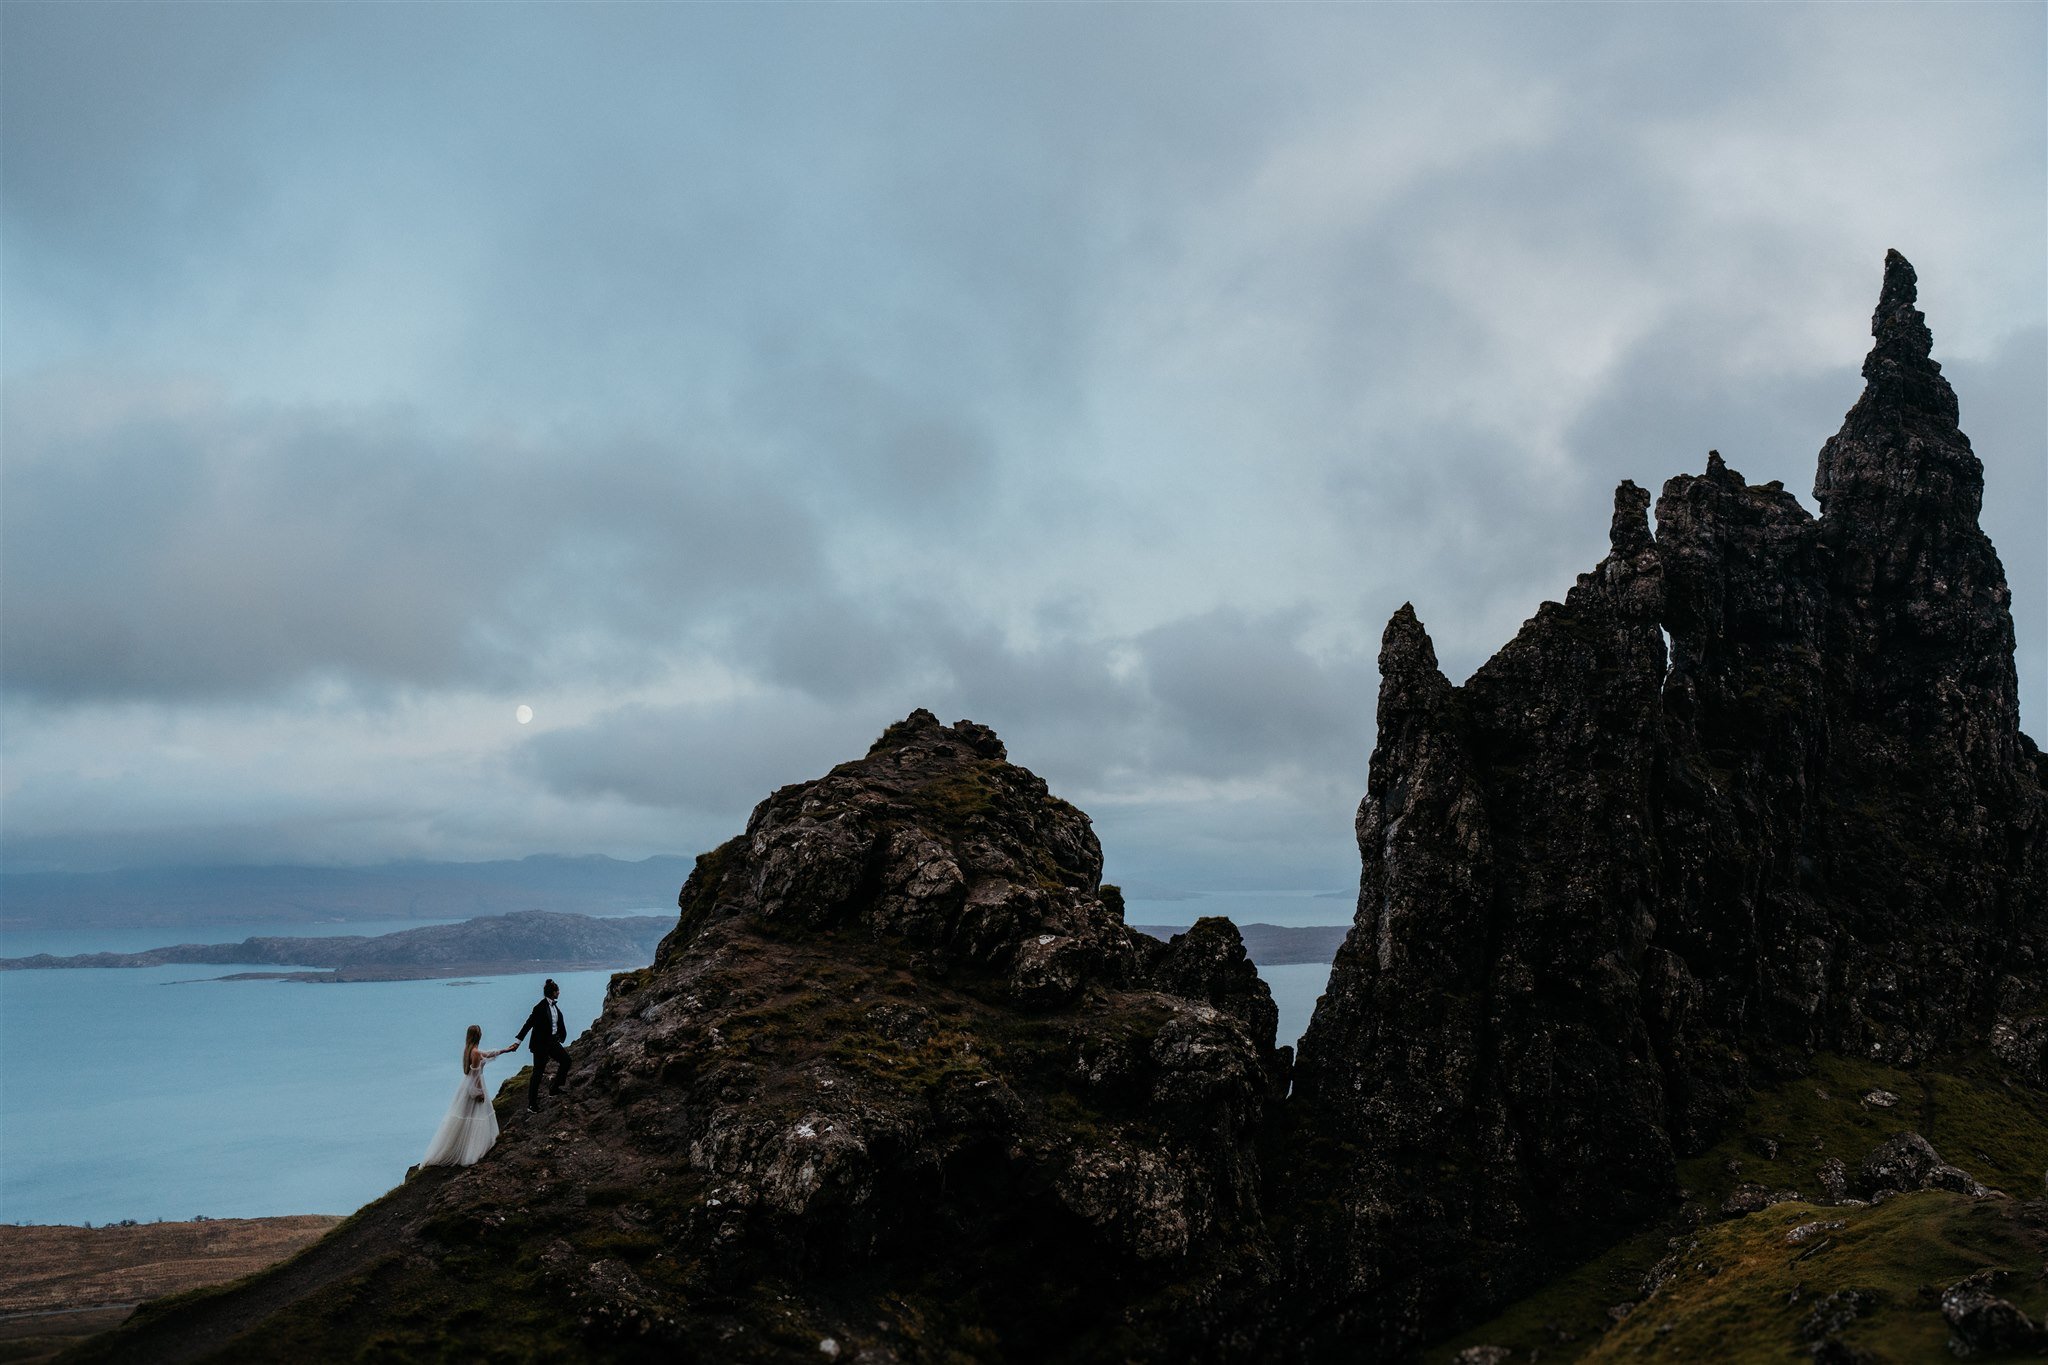 Brides hold hands as they walk up a hill on the Isle of Skye during blue hour